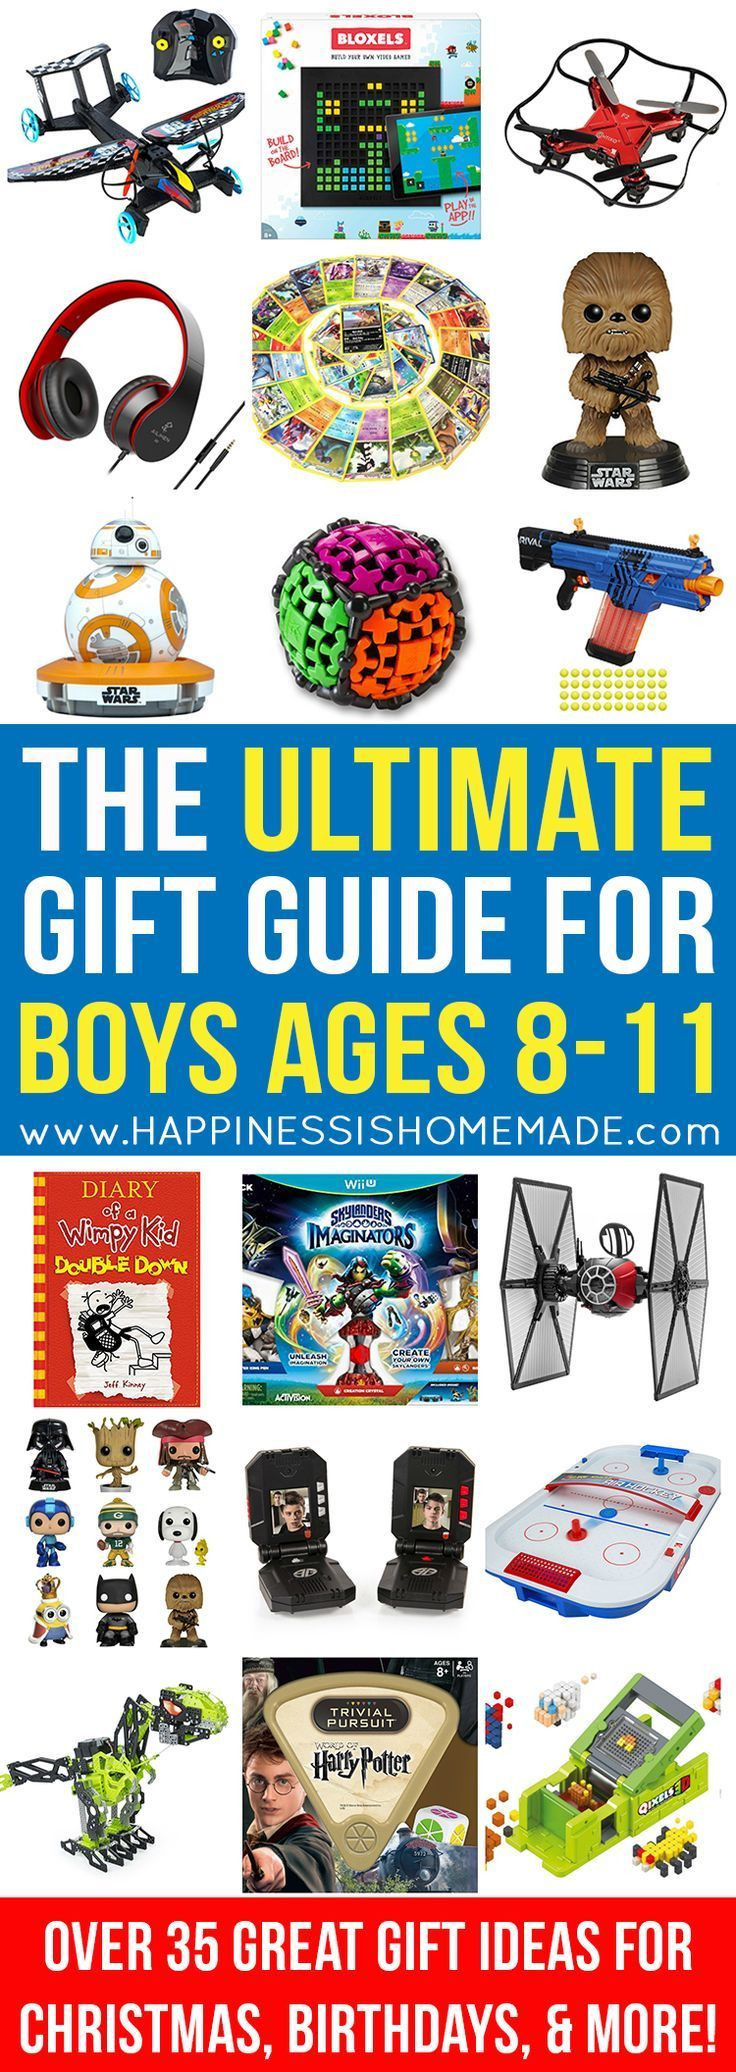 Gift Ideas For Girls Age 8
 120 best images about Best Toys for 8 Year Old Girls on